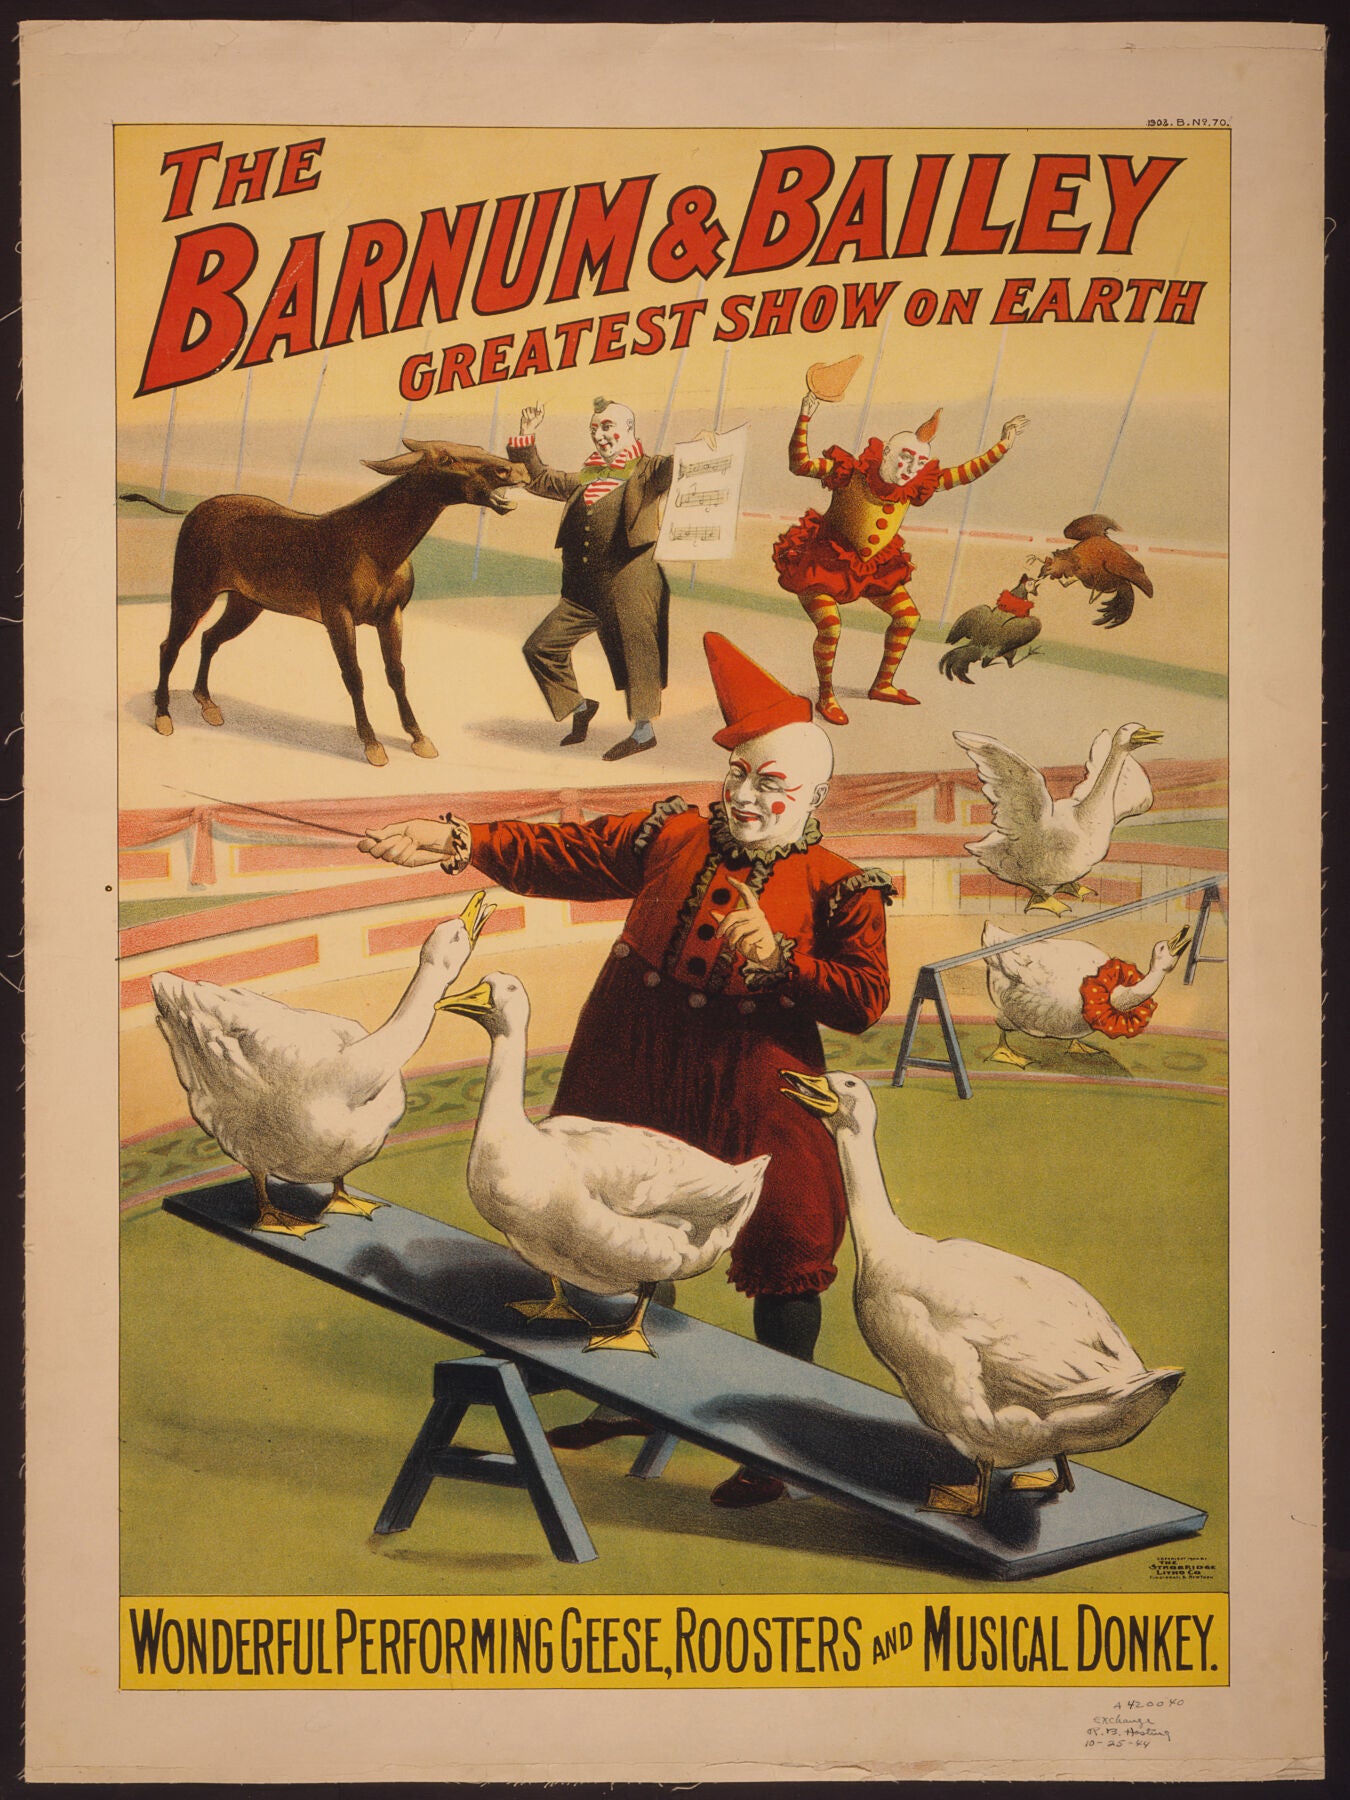 Barnum & Bailey - The Greatest Show On Earth - Wonderful performing geese, roosters and musical donkey.